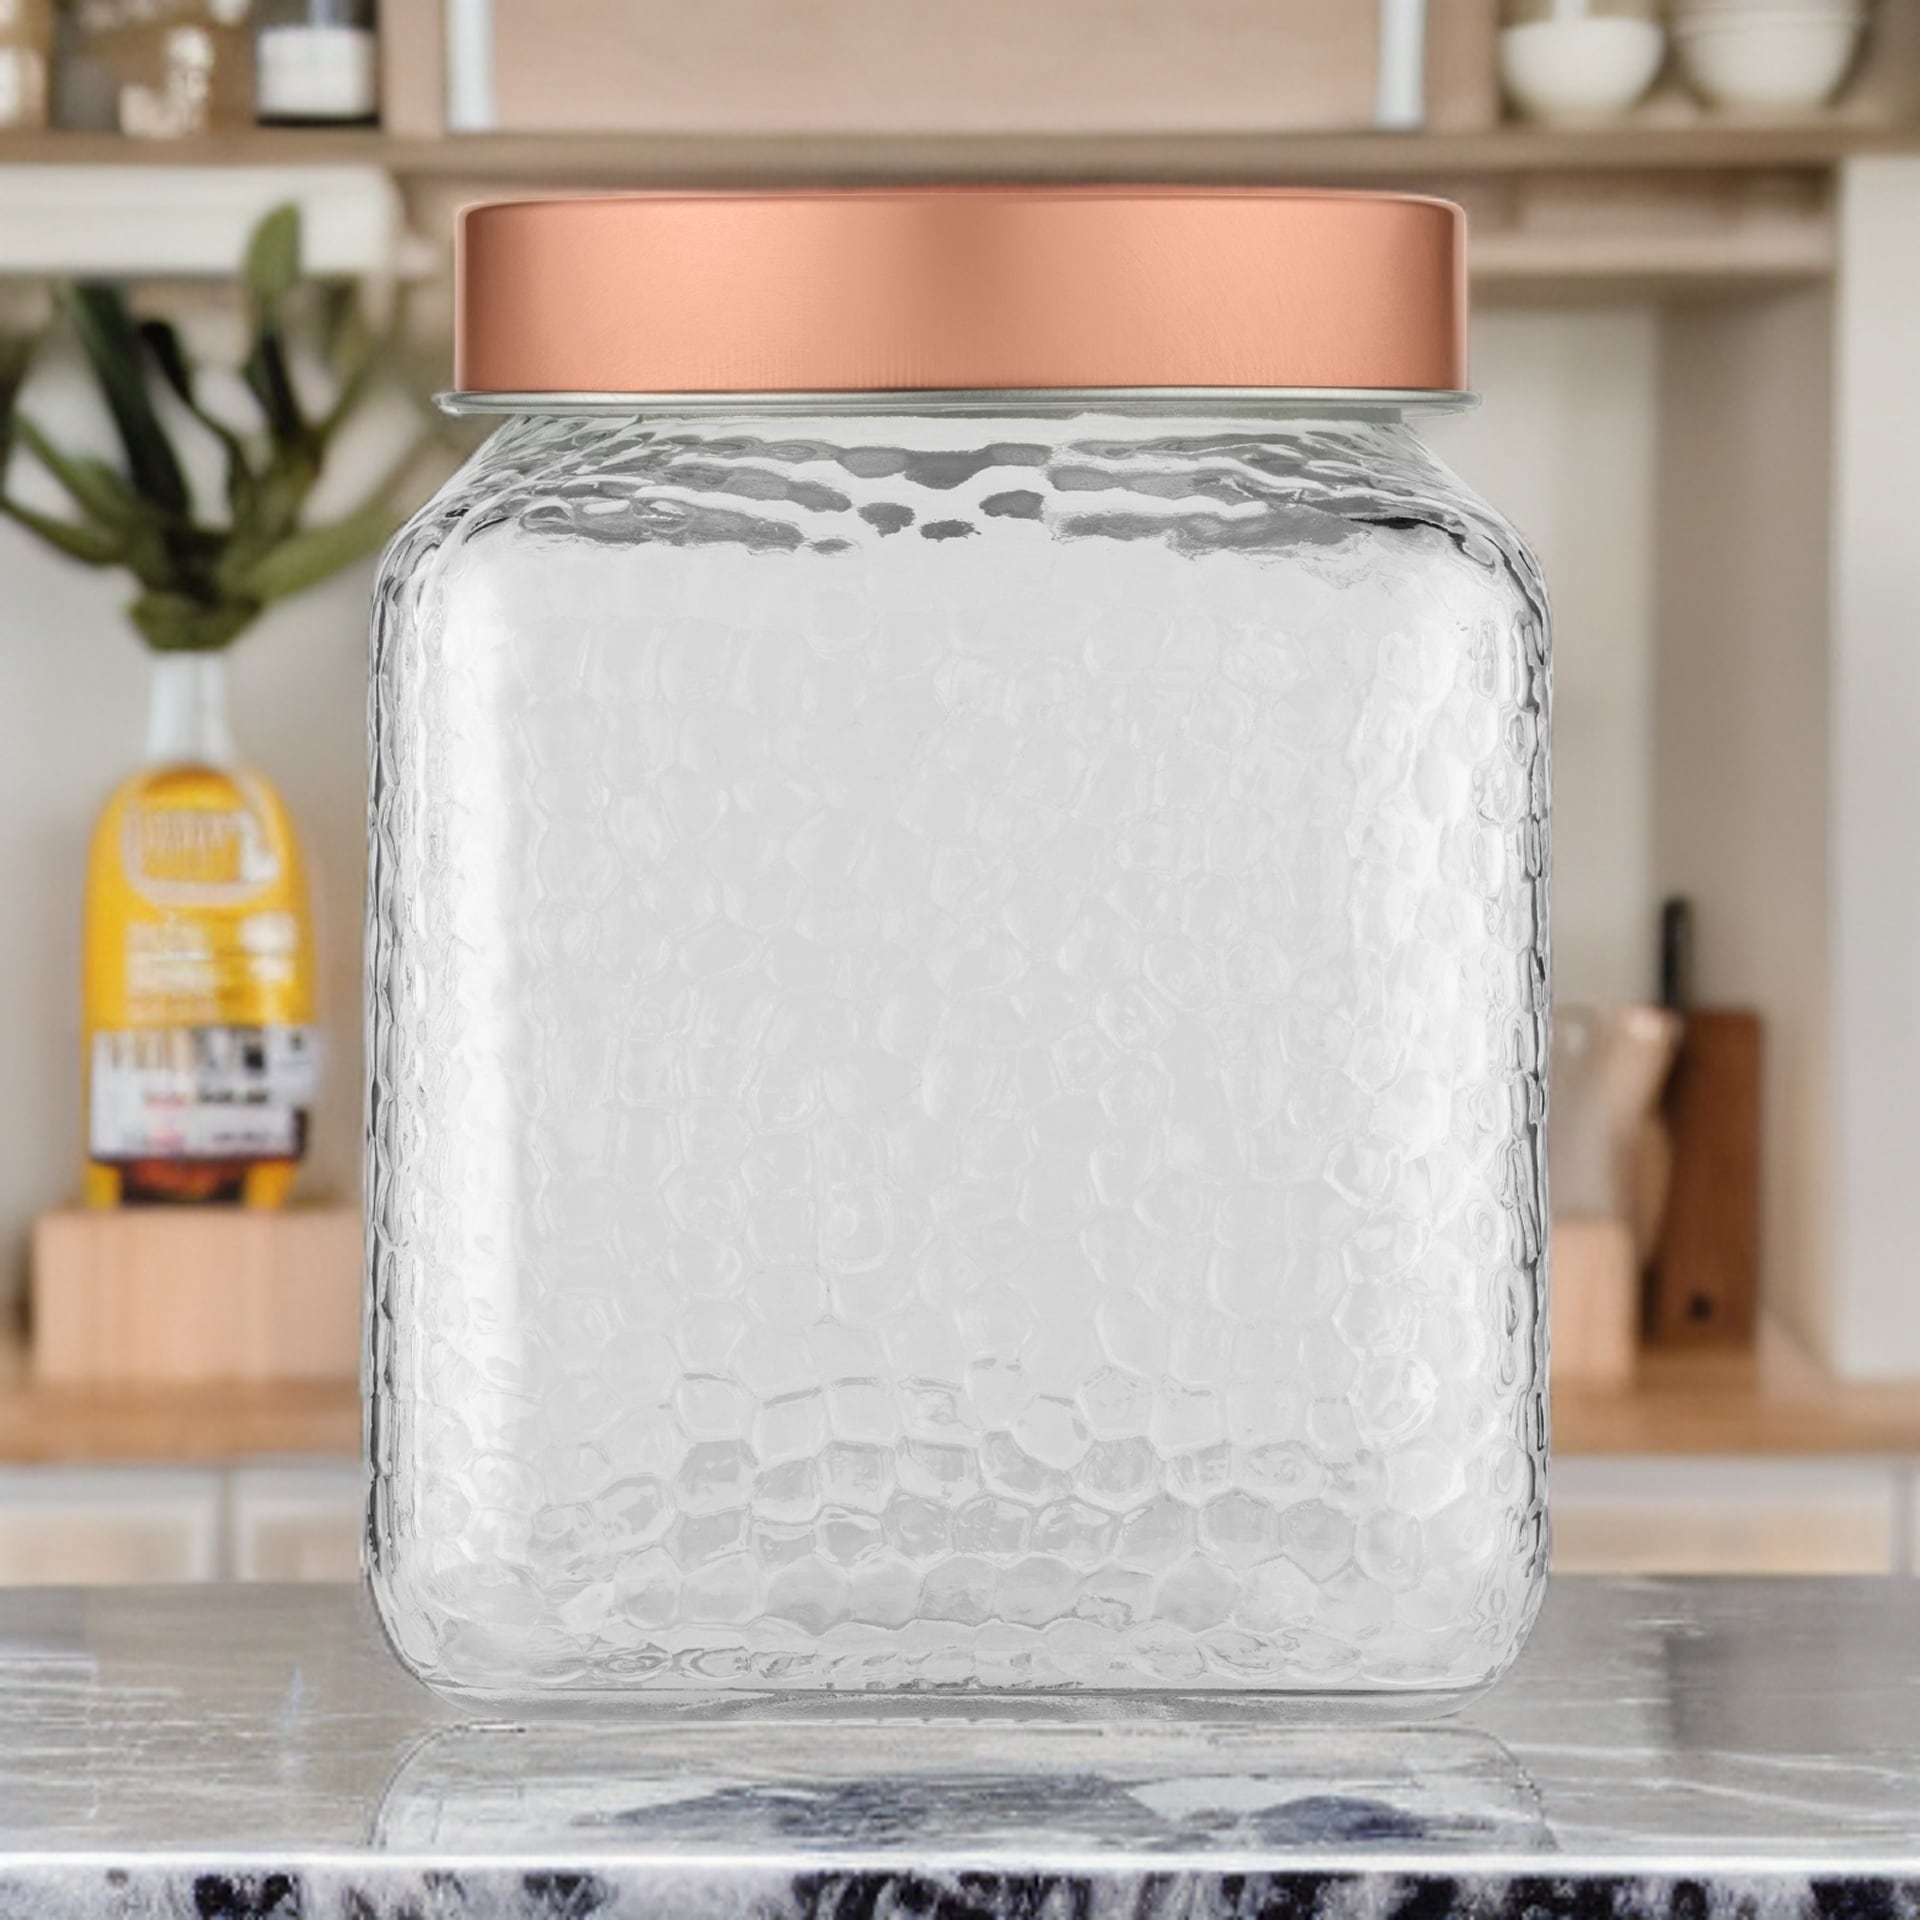 https://ak1.ostkcdn.com/images/products/is/images/direct/a3bae1a521df077a733c3d8e06d8de37290b2c25/Amici-Home-Sierra-Glass-Canister-Container-Storage-Jar.jpg